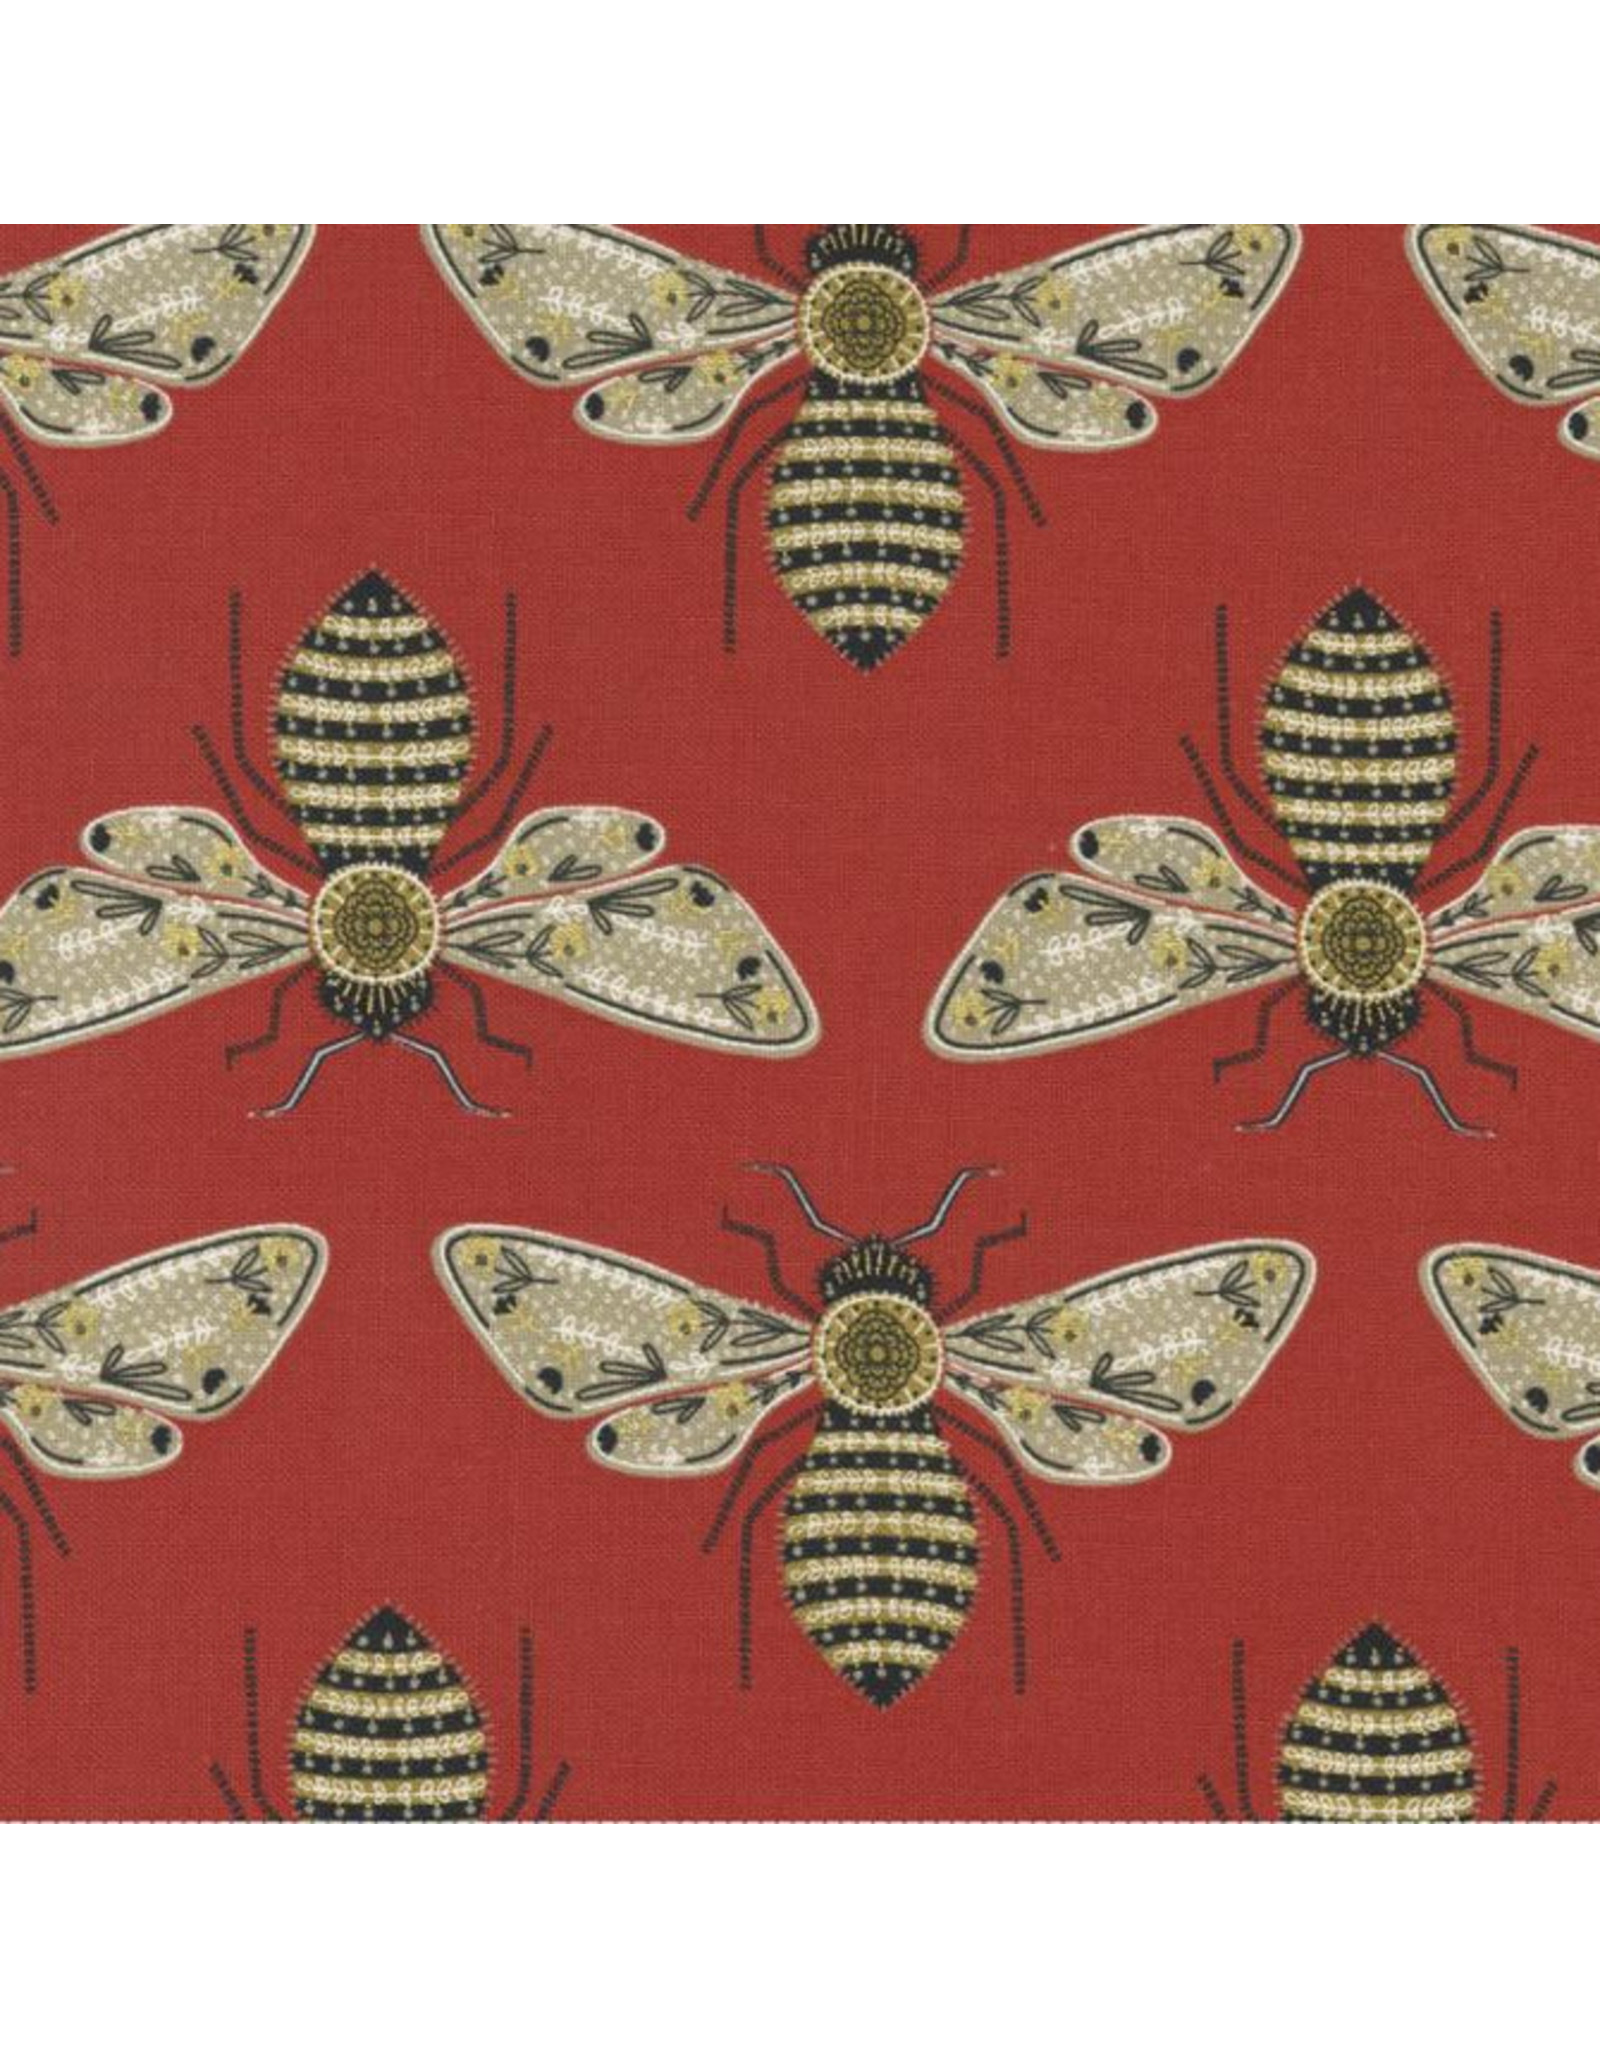 Gingiber Meadowmere, Bumble Bees in Poppy with Metallic, Fabric Half-Yards